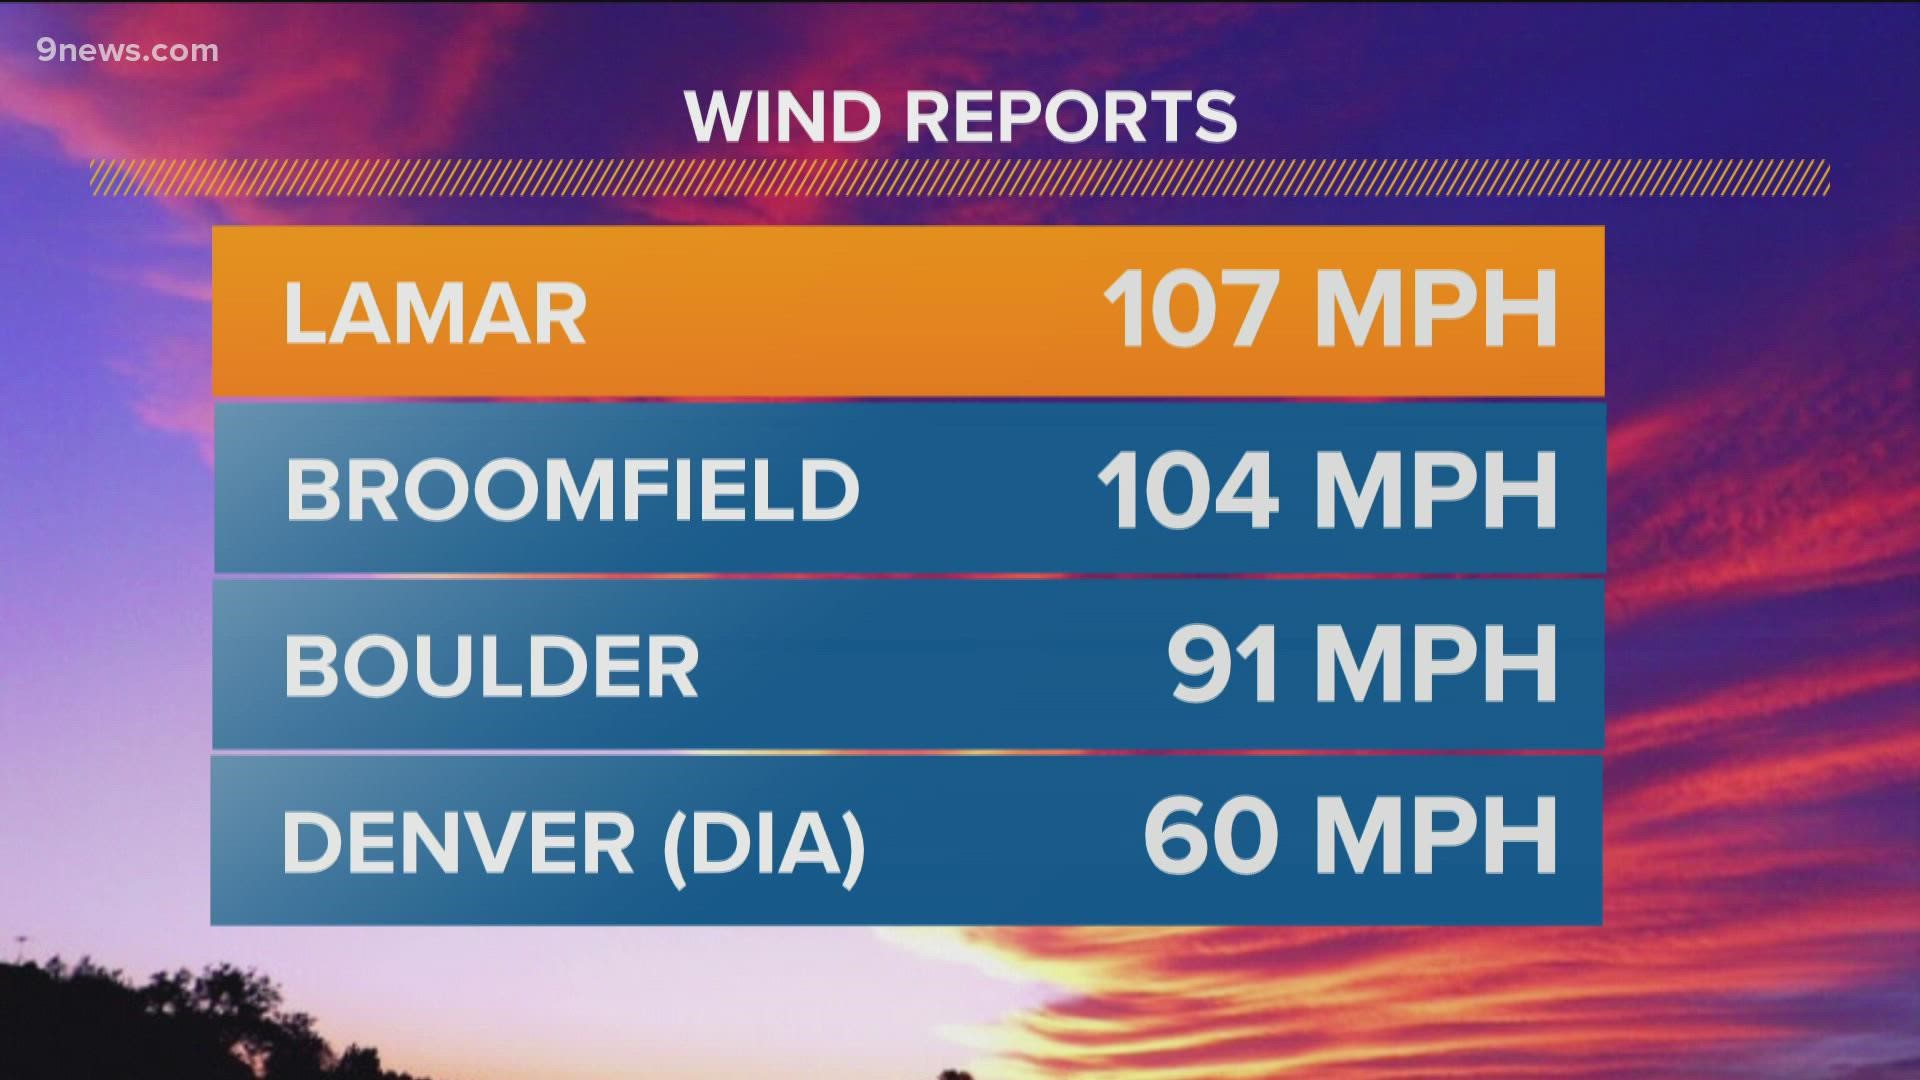 Winds could gust to 100 mph in parts of Colorado on Wednesday. Meteorologist Chris Bianchi has the latest on the High Wind Warnings in effect.